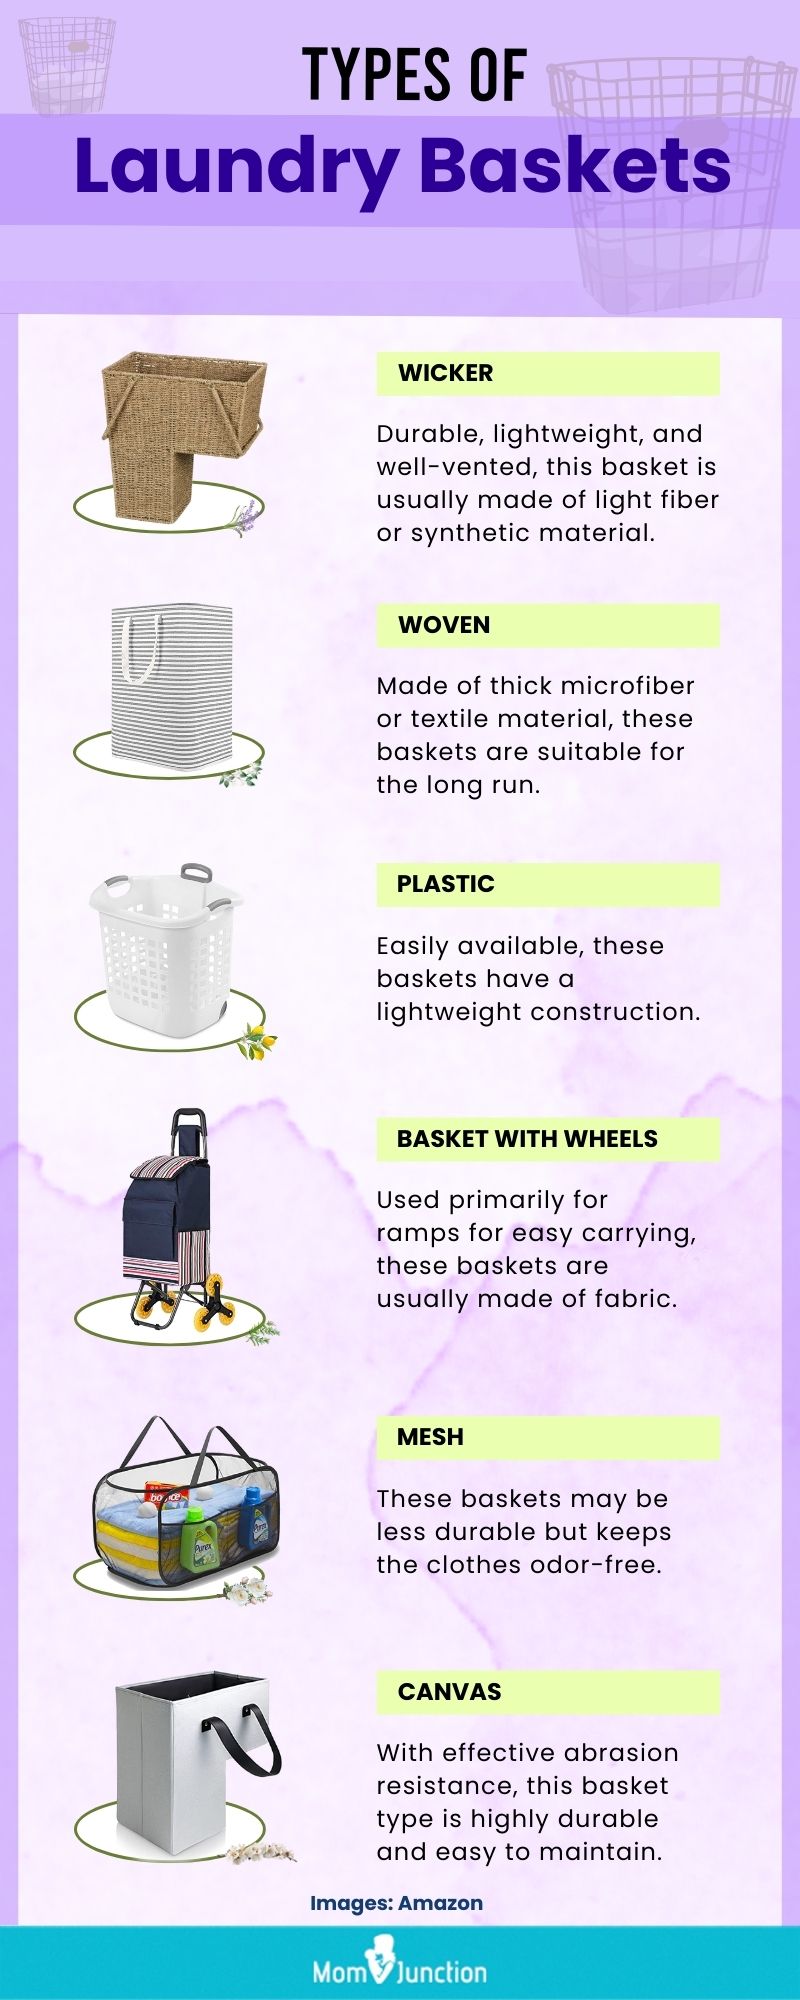 Types Of Laundry Basket (infographic)